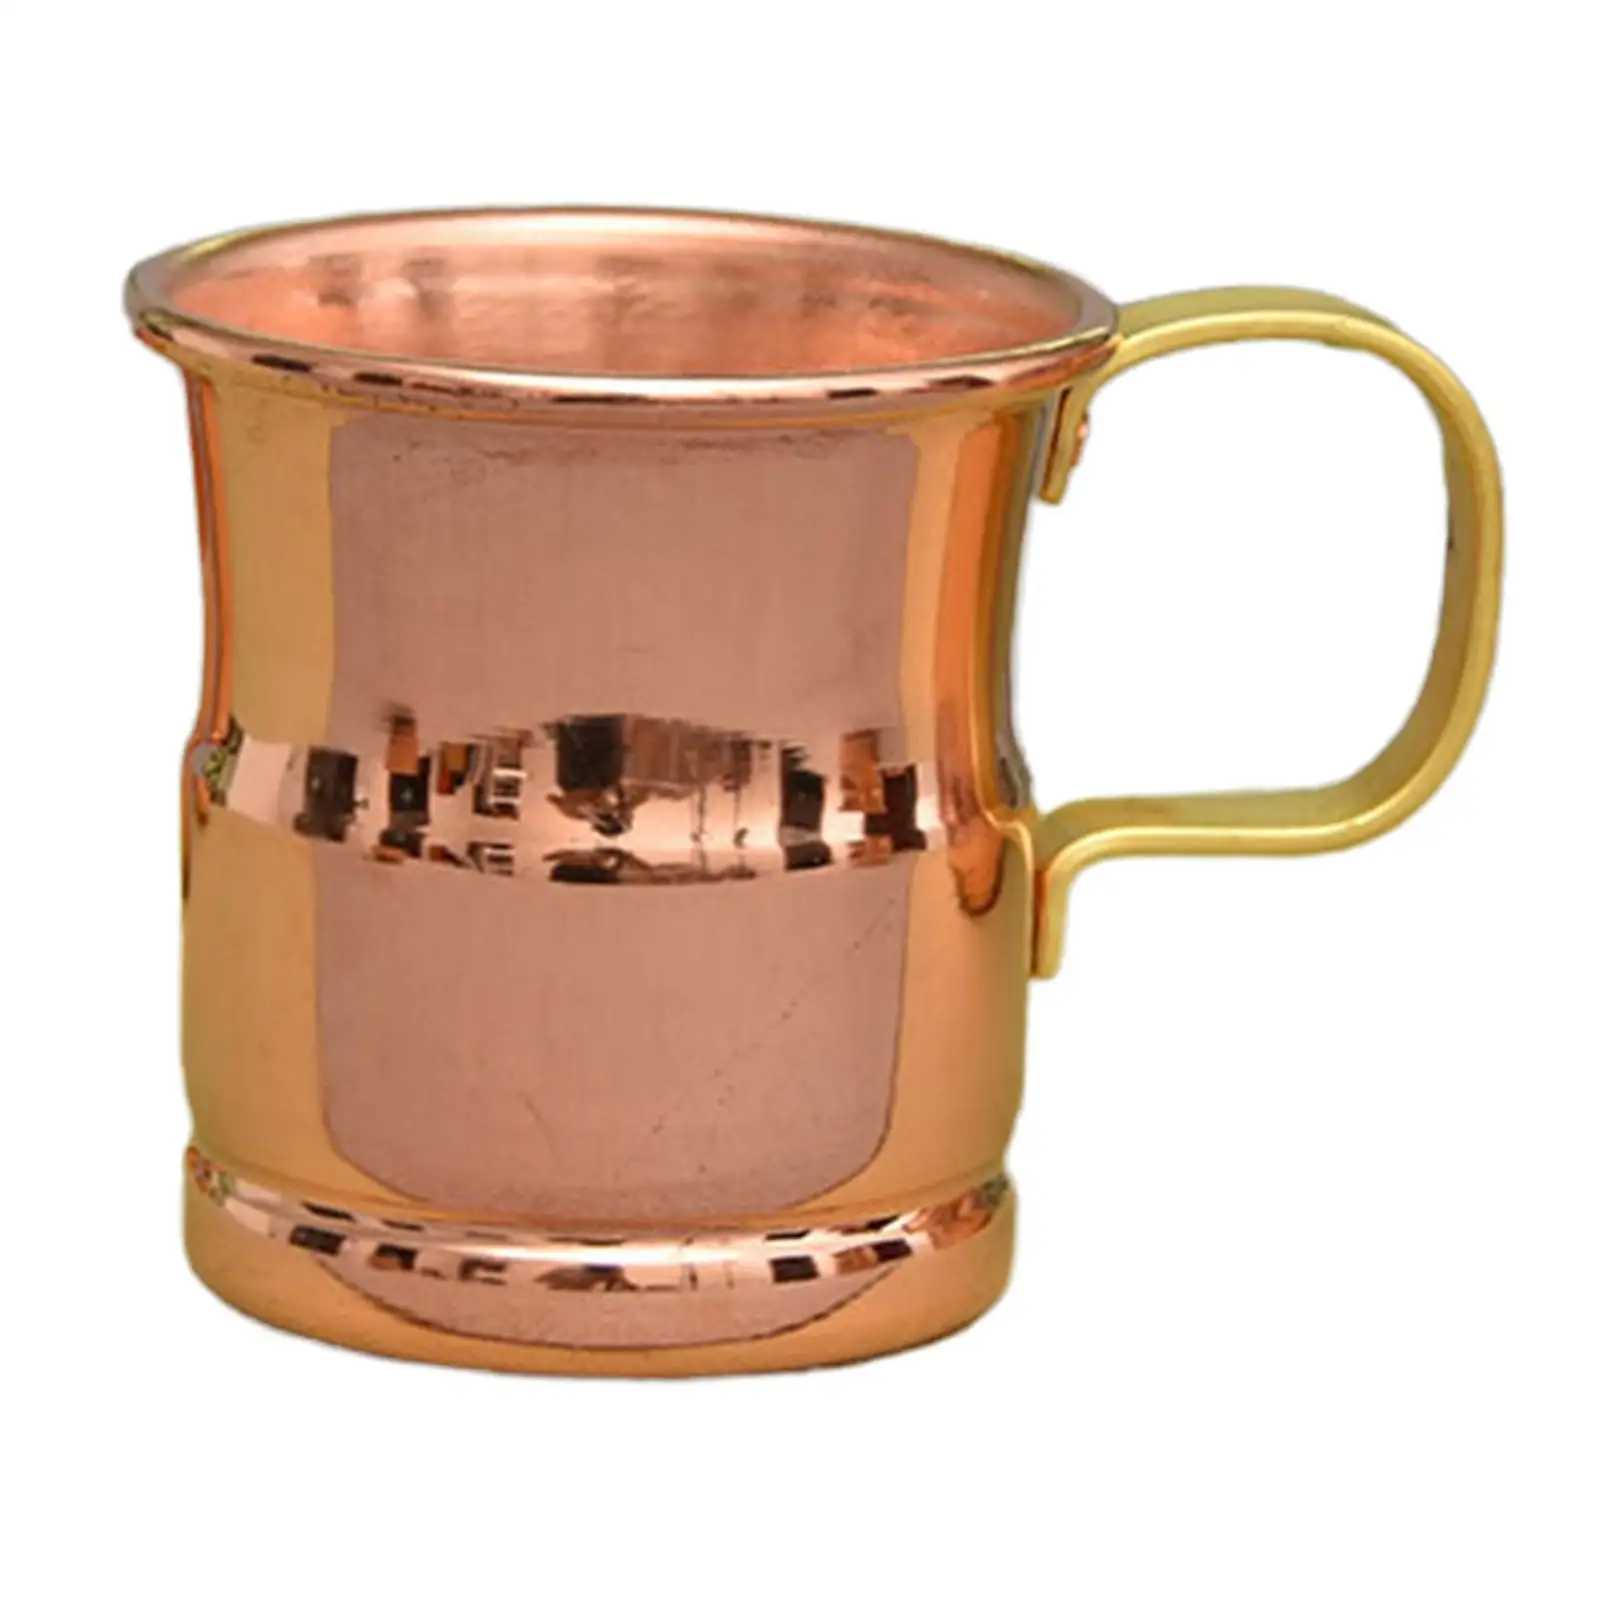 Copper Cup Bar Tableware Dinner Moscow Water Mule Beverage Cup for Party Drinkware Coffee Cup Moscow Mule Mug Water Cup Decor